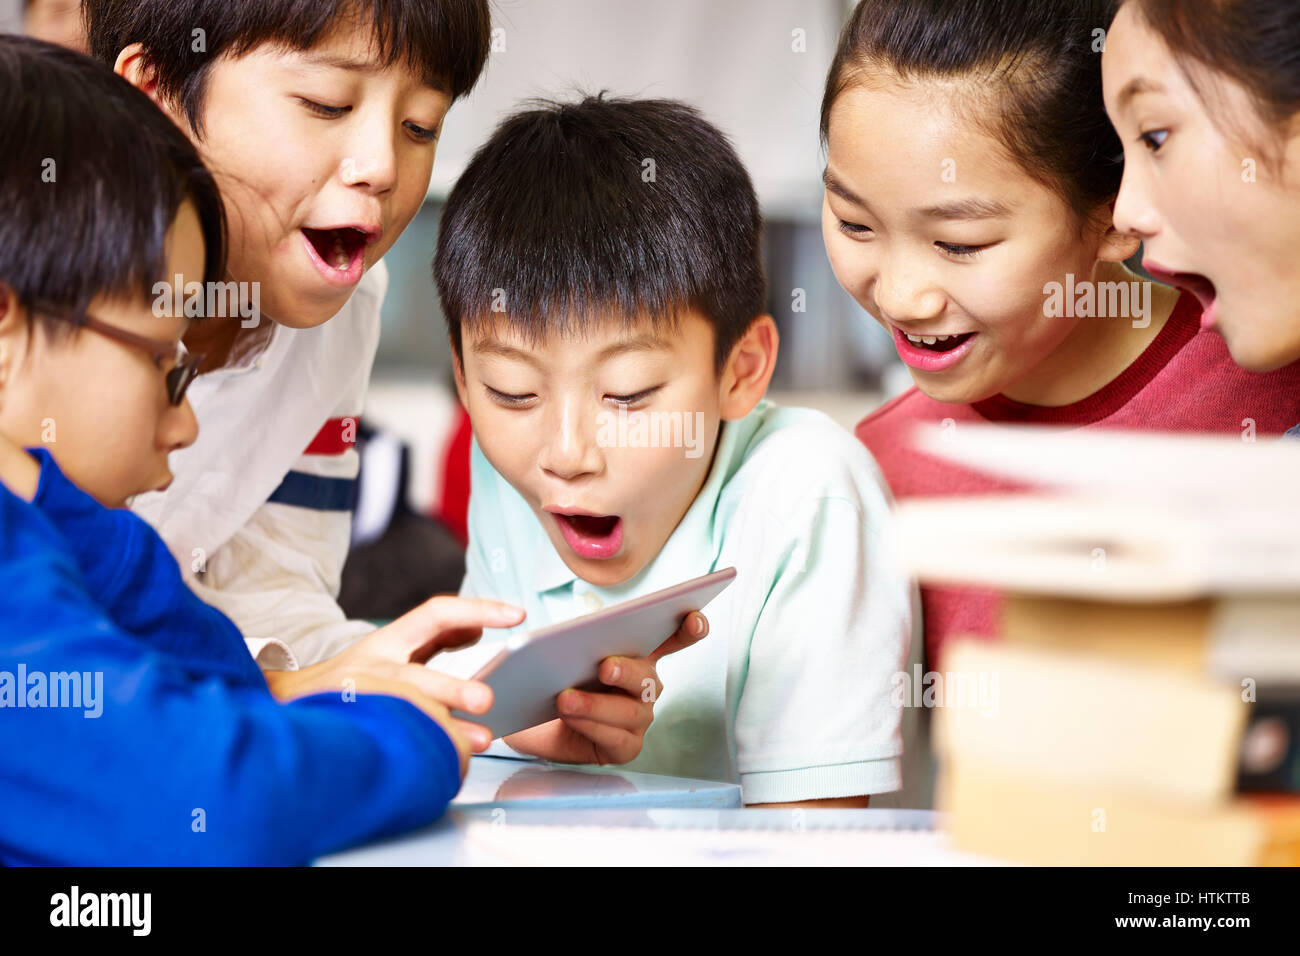 group of asian elementary school children gathering around playing game together using tablet during break. Stock Photo